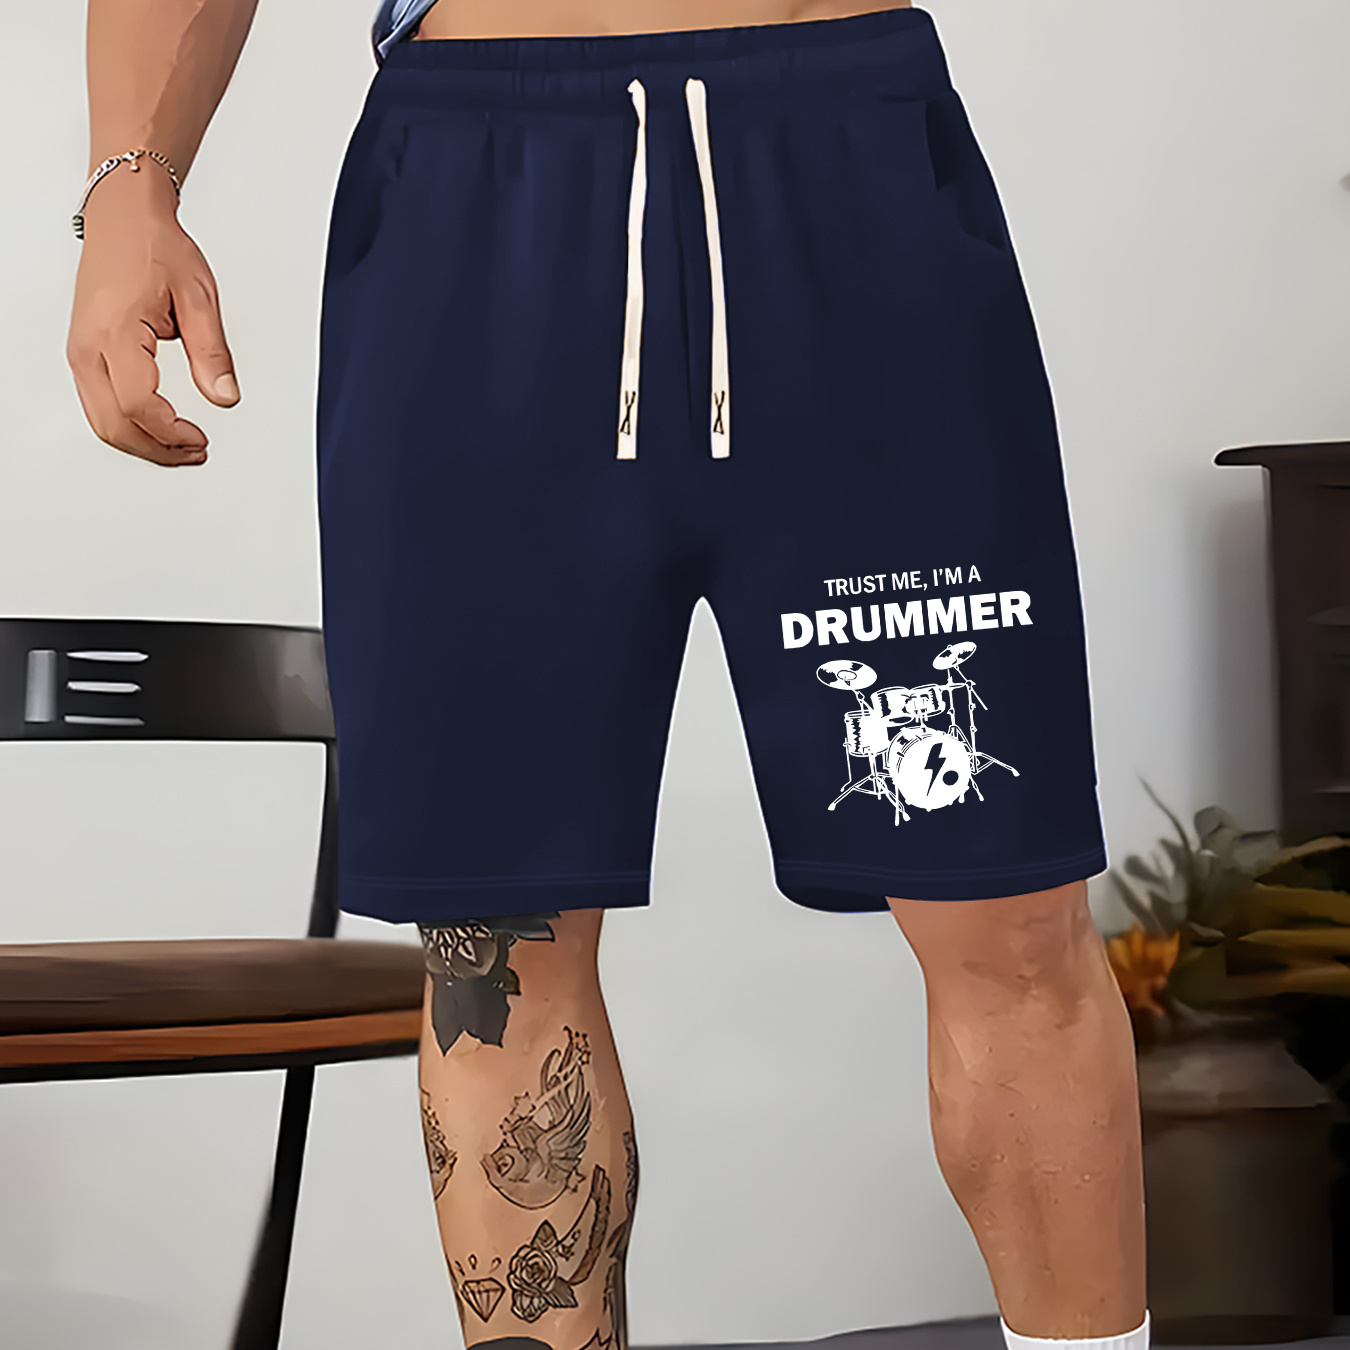 

Trust Me I Am A Drummer Print, Men's Drawstring Pants, Loose Casual Waist Simple Style Comfy Shorts For Spring Summer Outdoor Fitness Cycling Climbing Mountain Holiday Daily Commute Dates